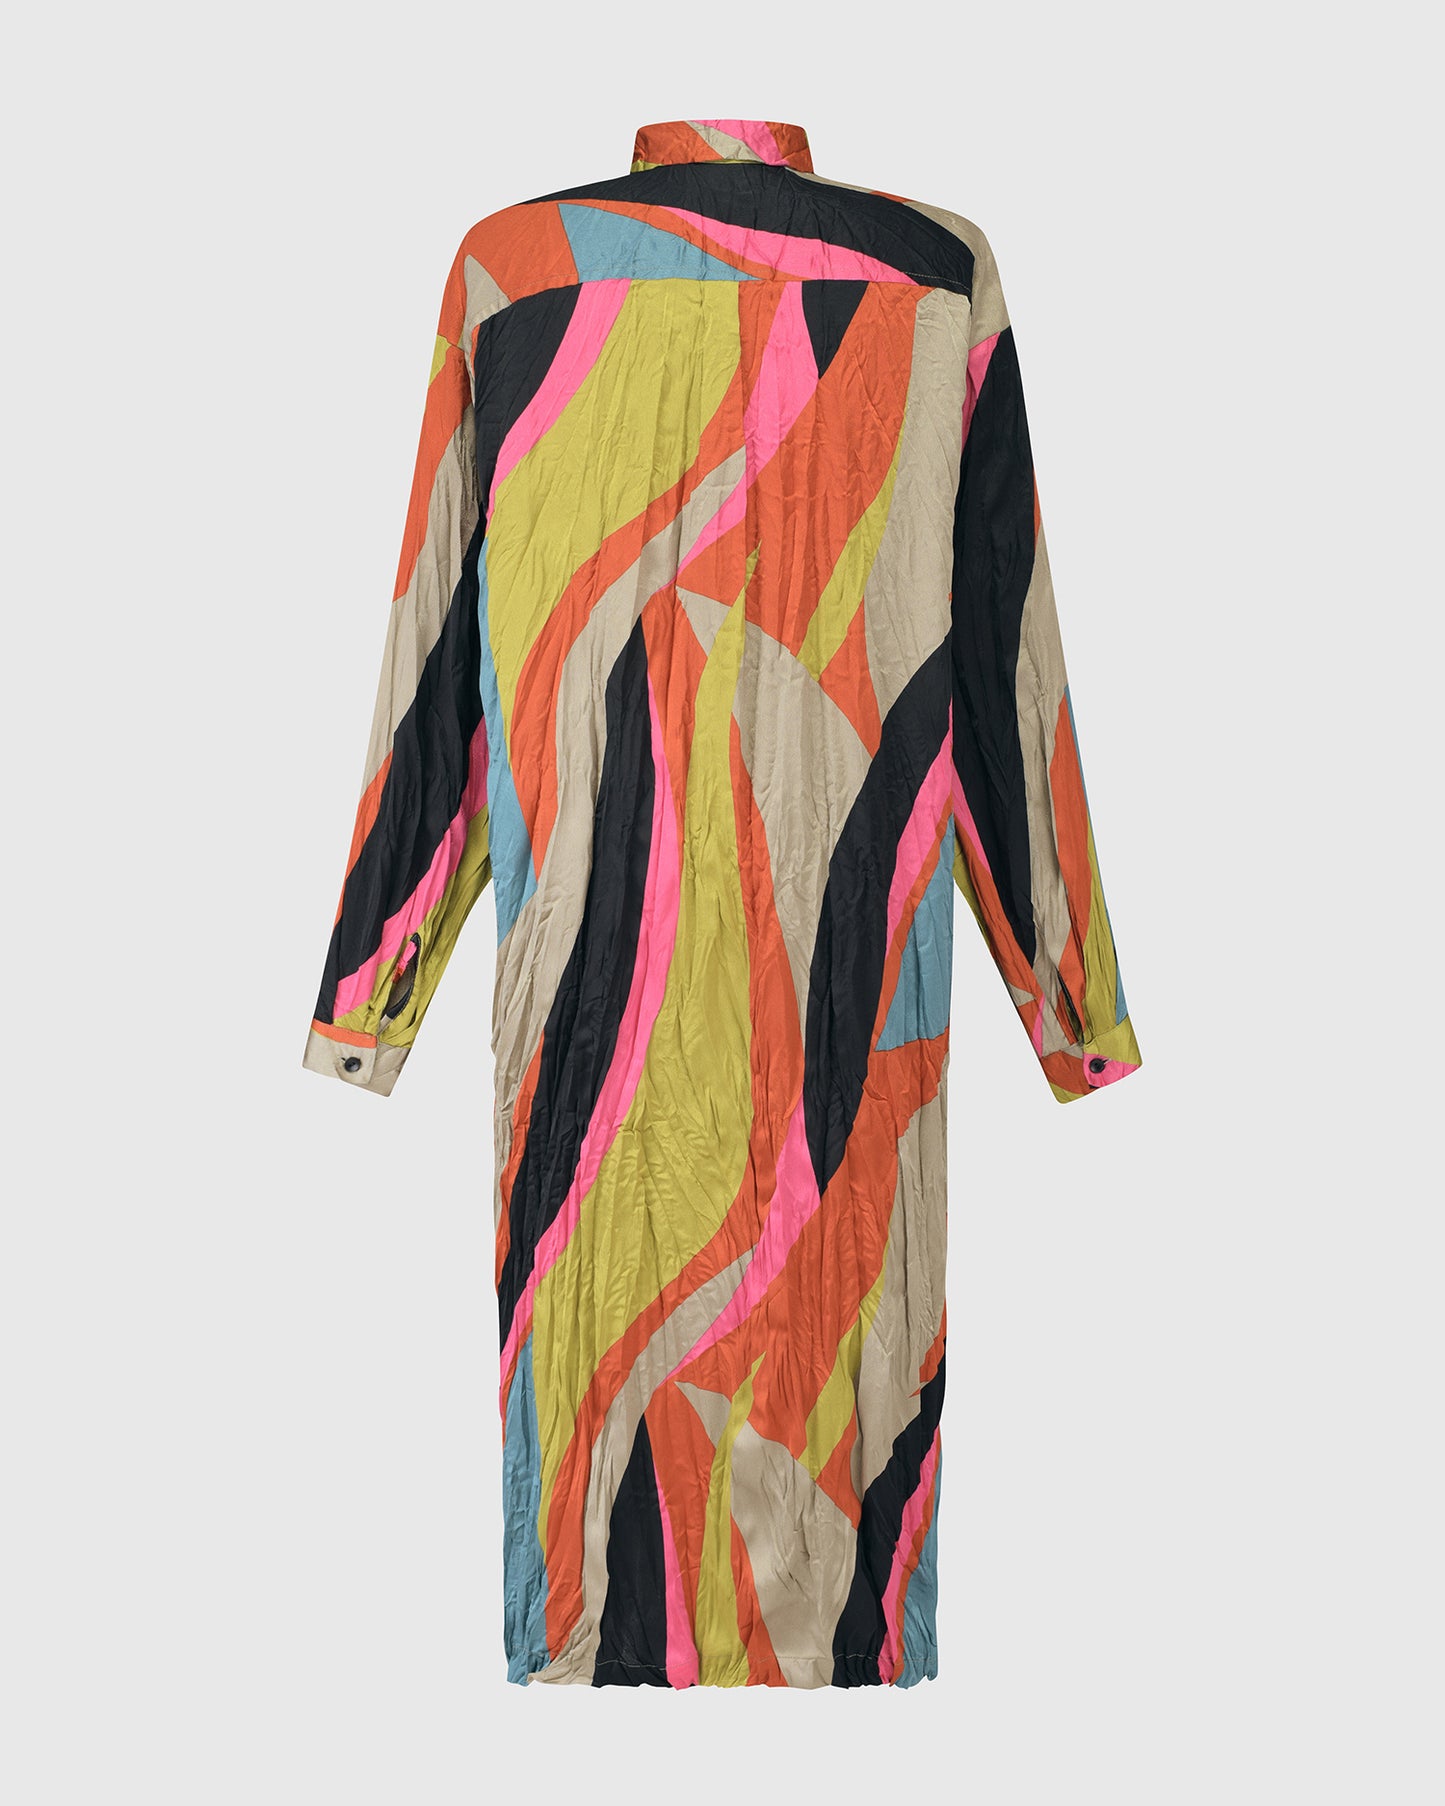 ABSTRACT CRINKLE SHIRTDRESS by Alembika